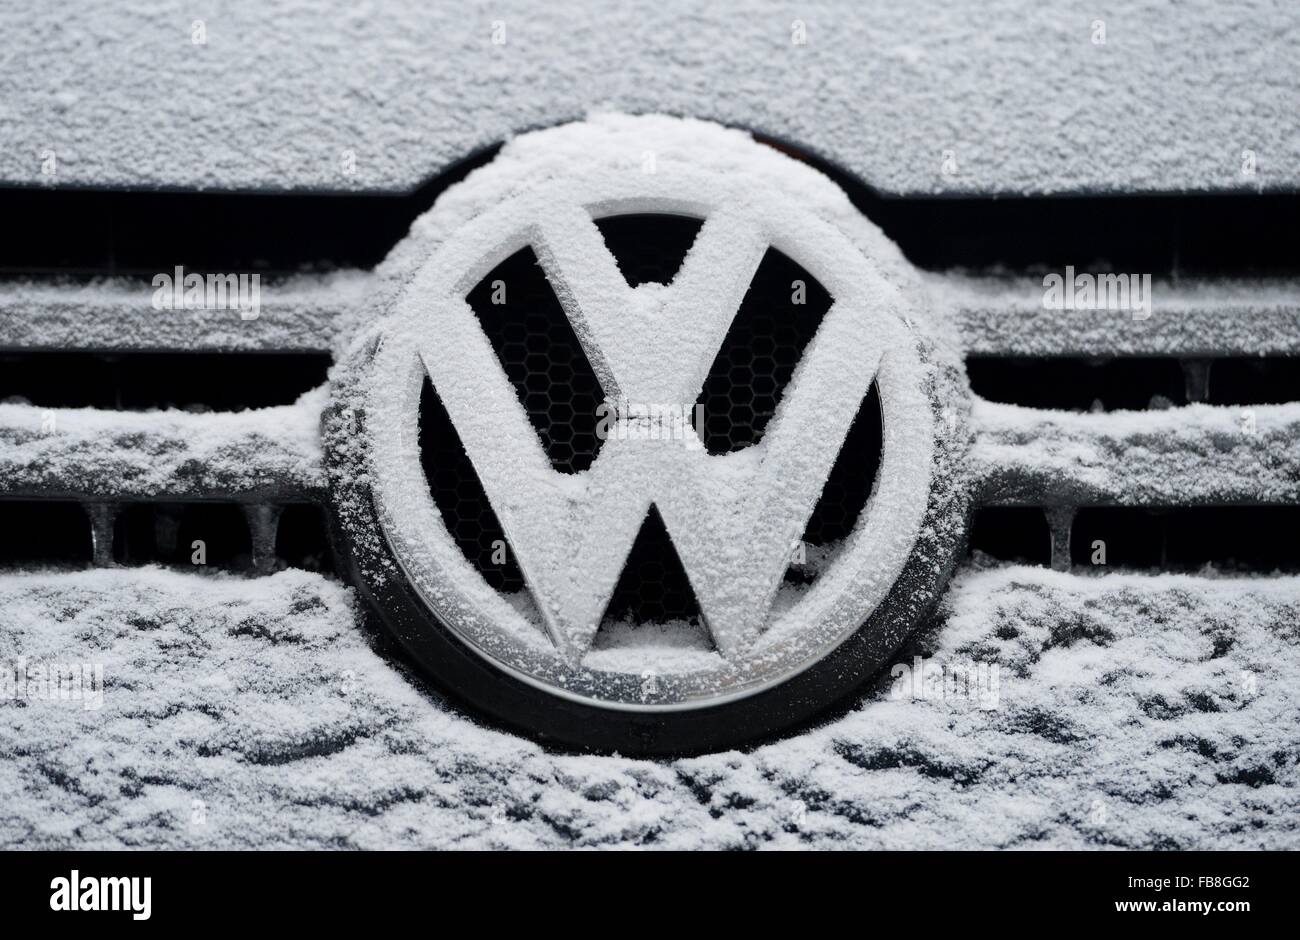 VW logo with snow, Germany, city of Osterode, 6. January 2016. Photo: Frank May Stock Photo